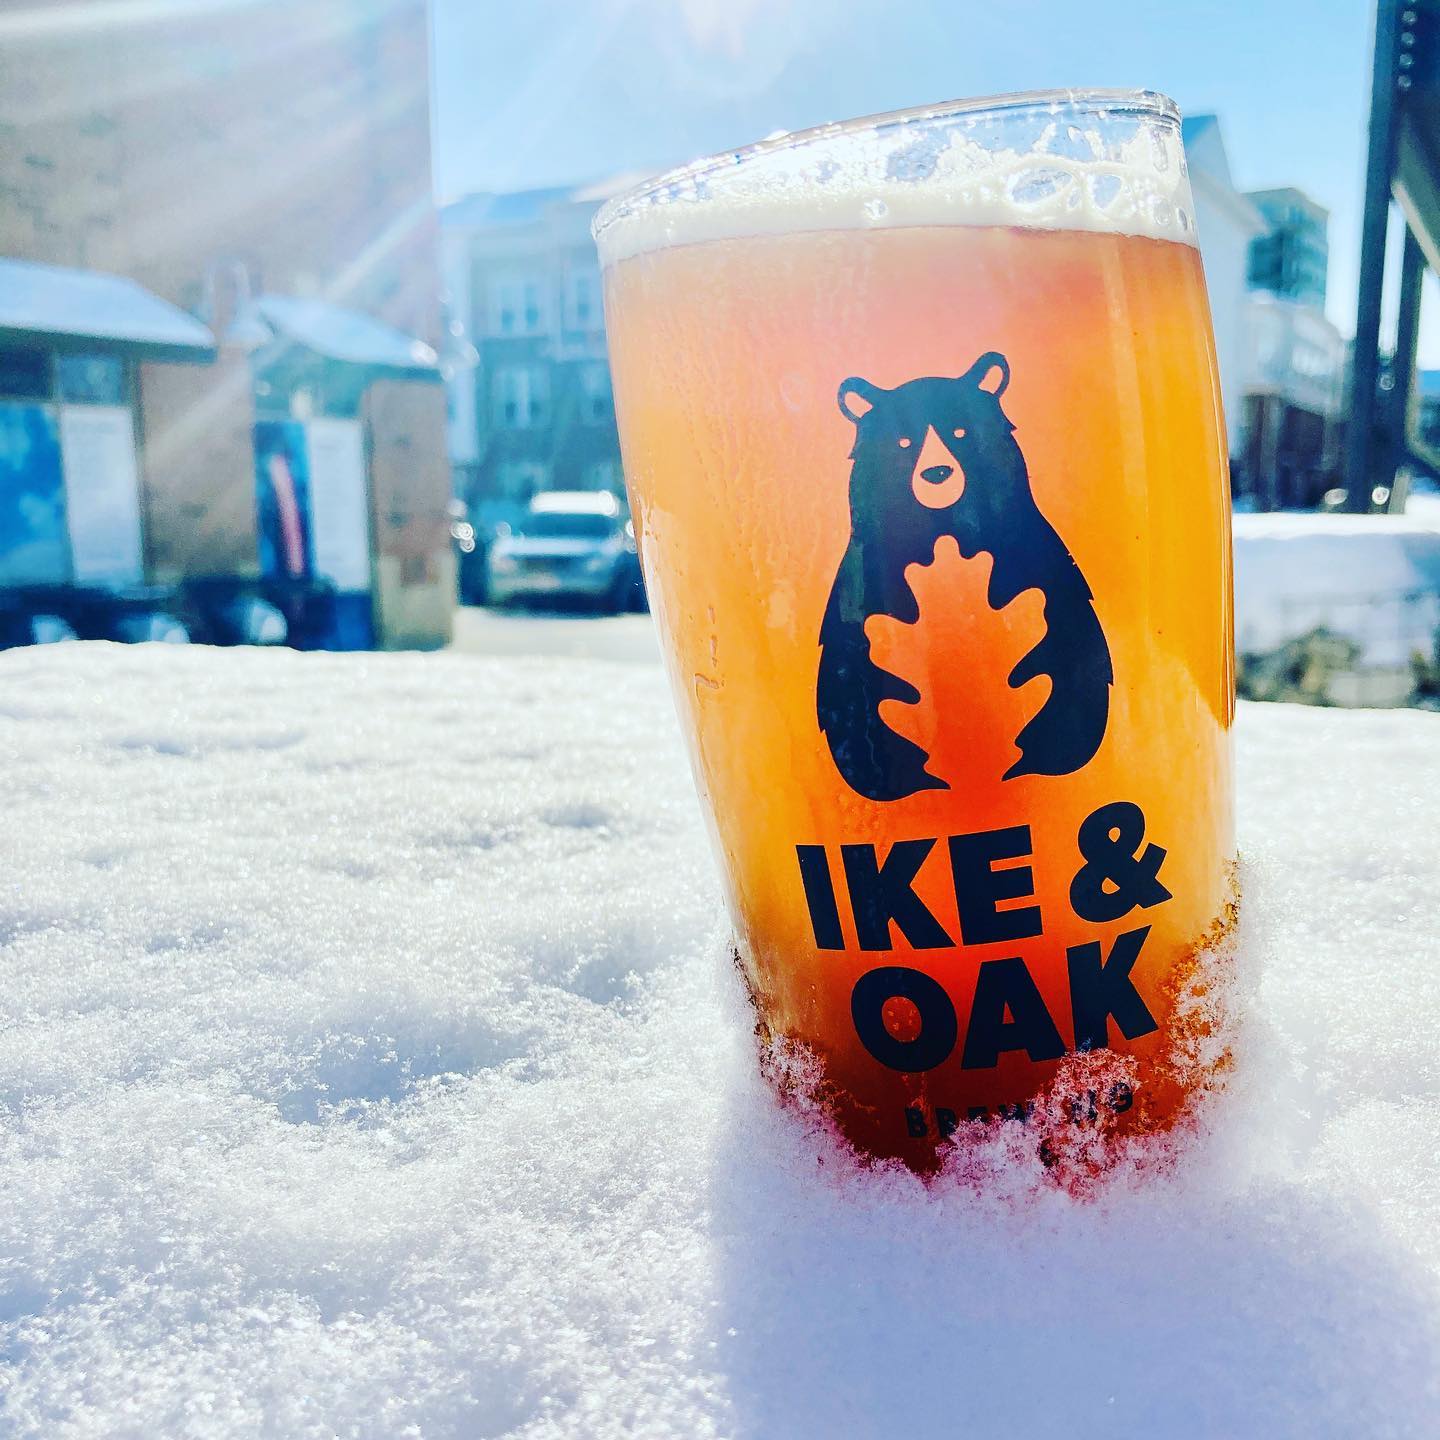 Glass of beer in snow at Ike & Oak Brewing